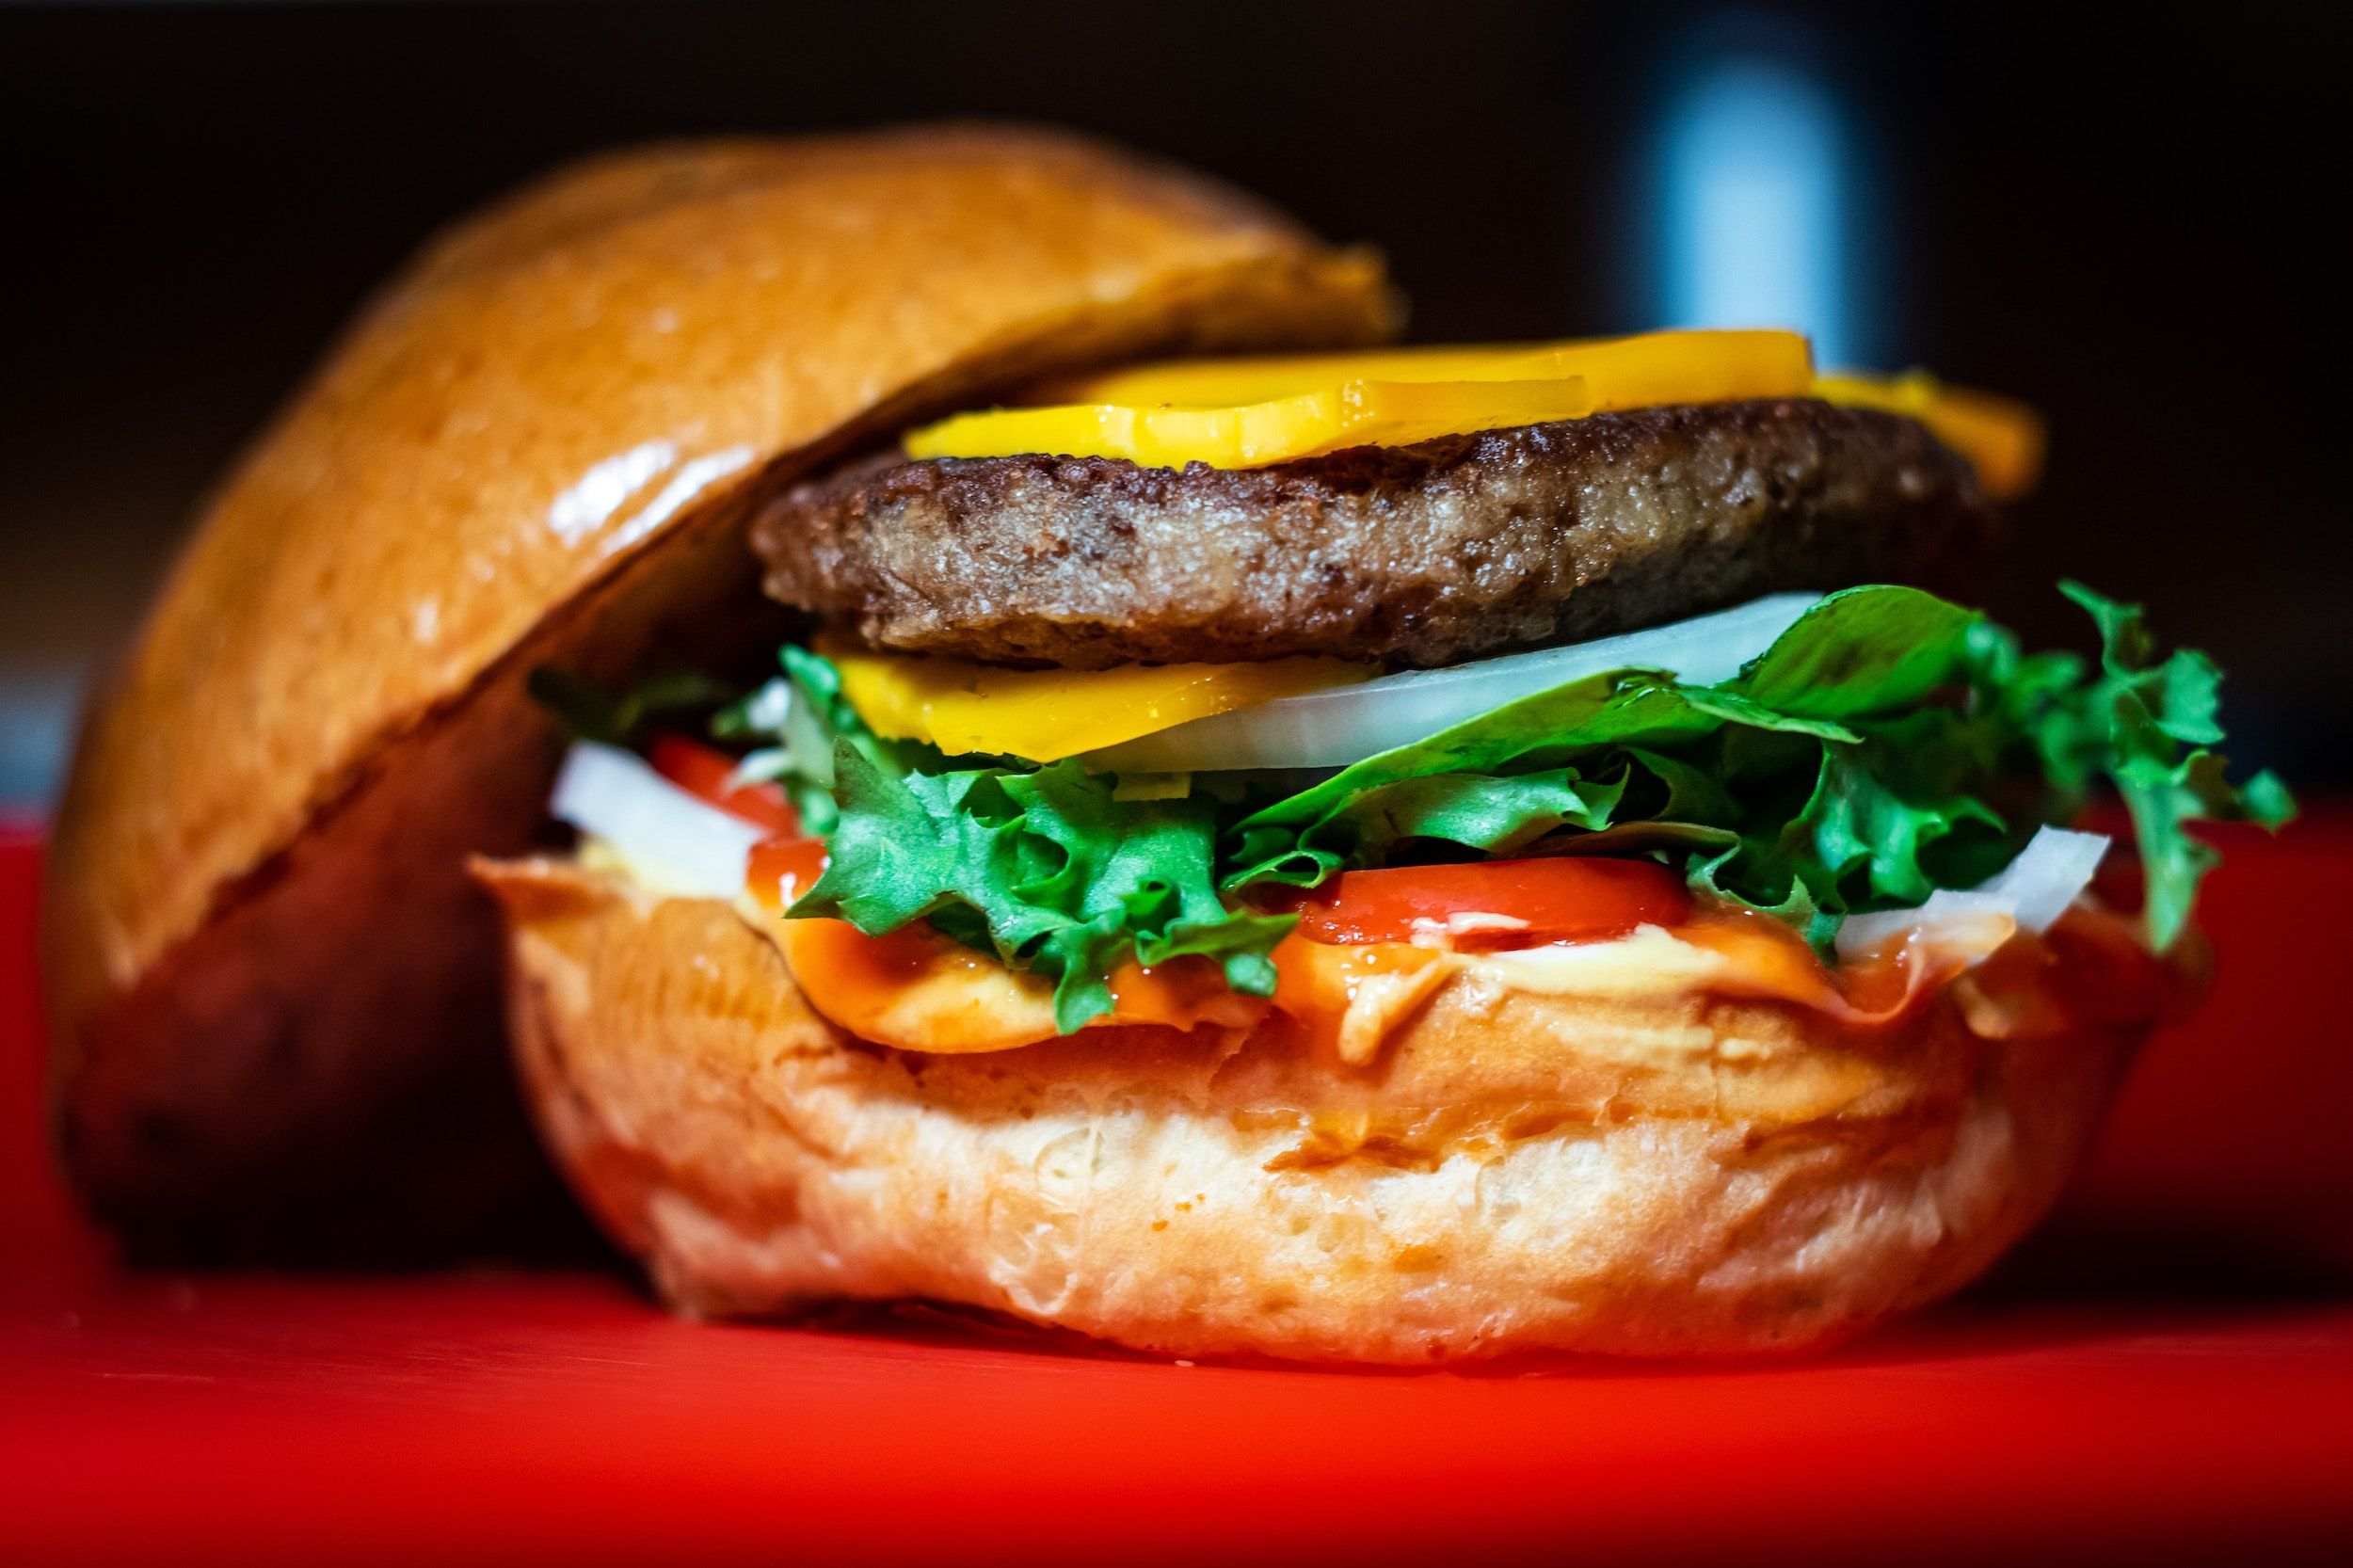 Burger Tour brings workshops, lectures and debates about the hamburger sector to São Paulo